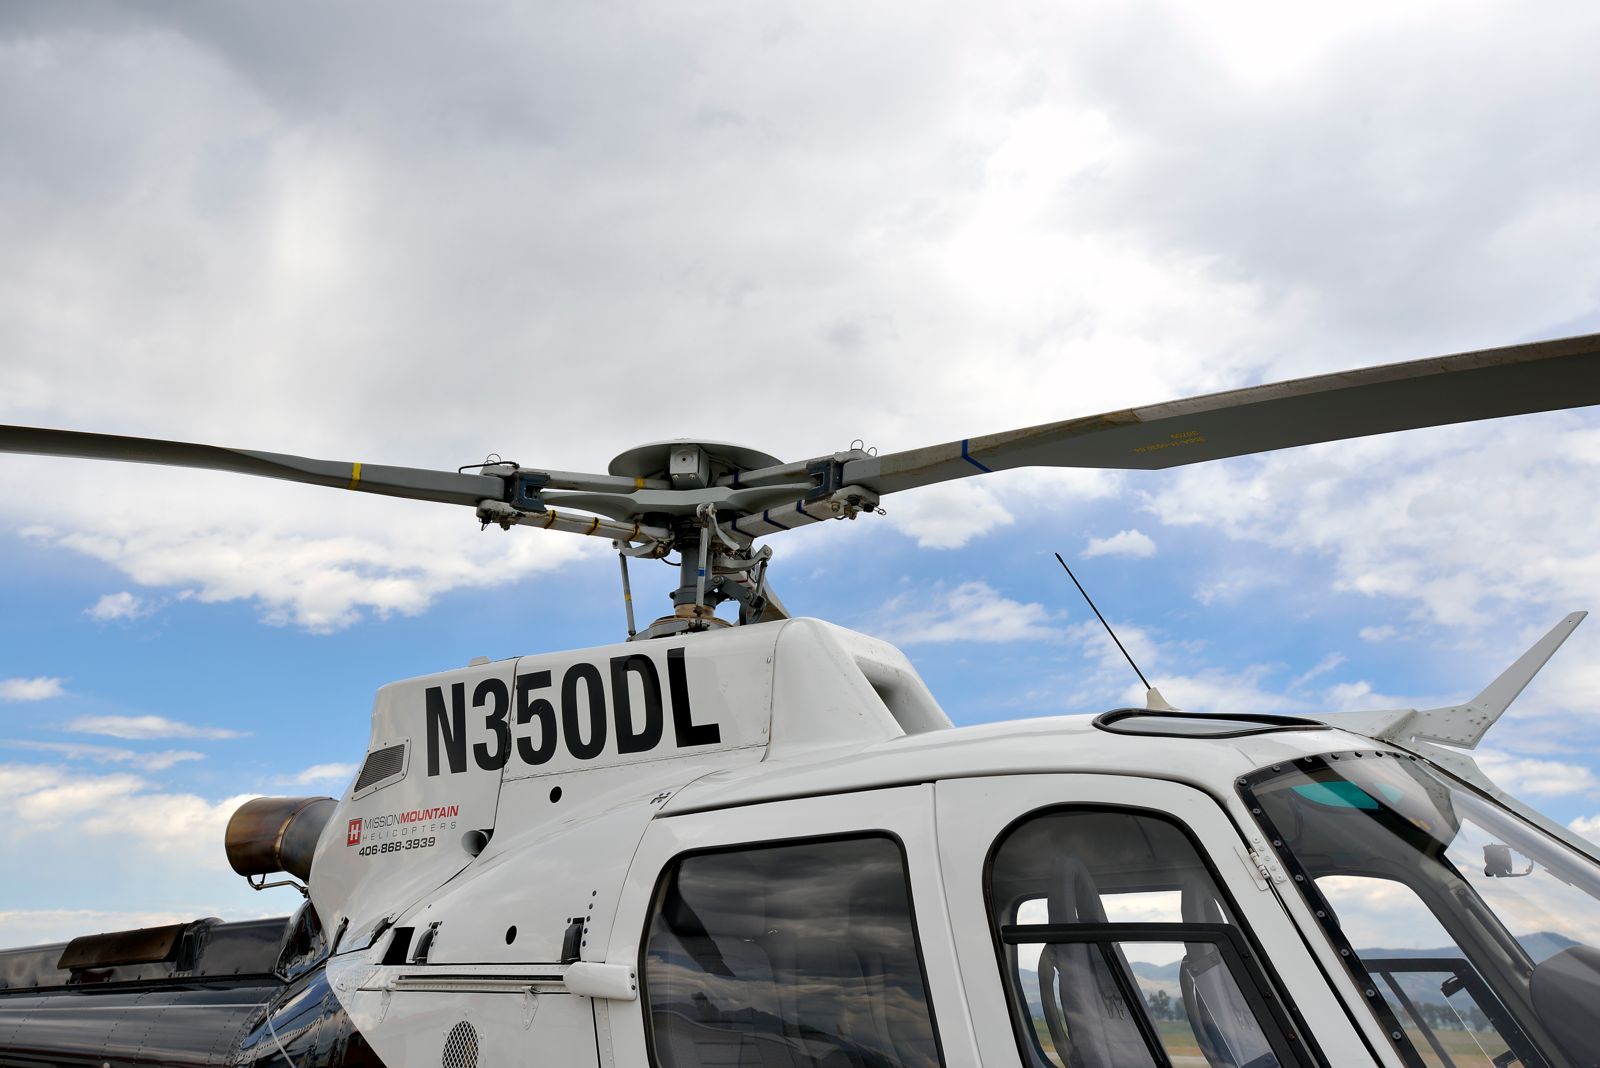 Eurocopter AS350 B3  S/N 4508 for sale | gallery image: /userfiles/images/Eurocopter_AS350B3_sn4508/ext1_300.jpg